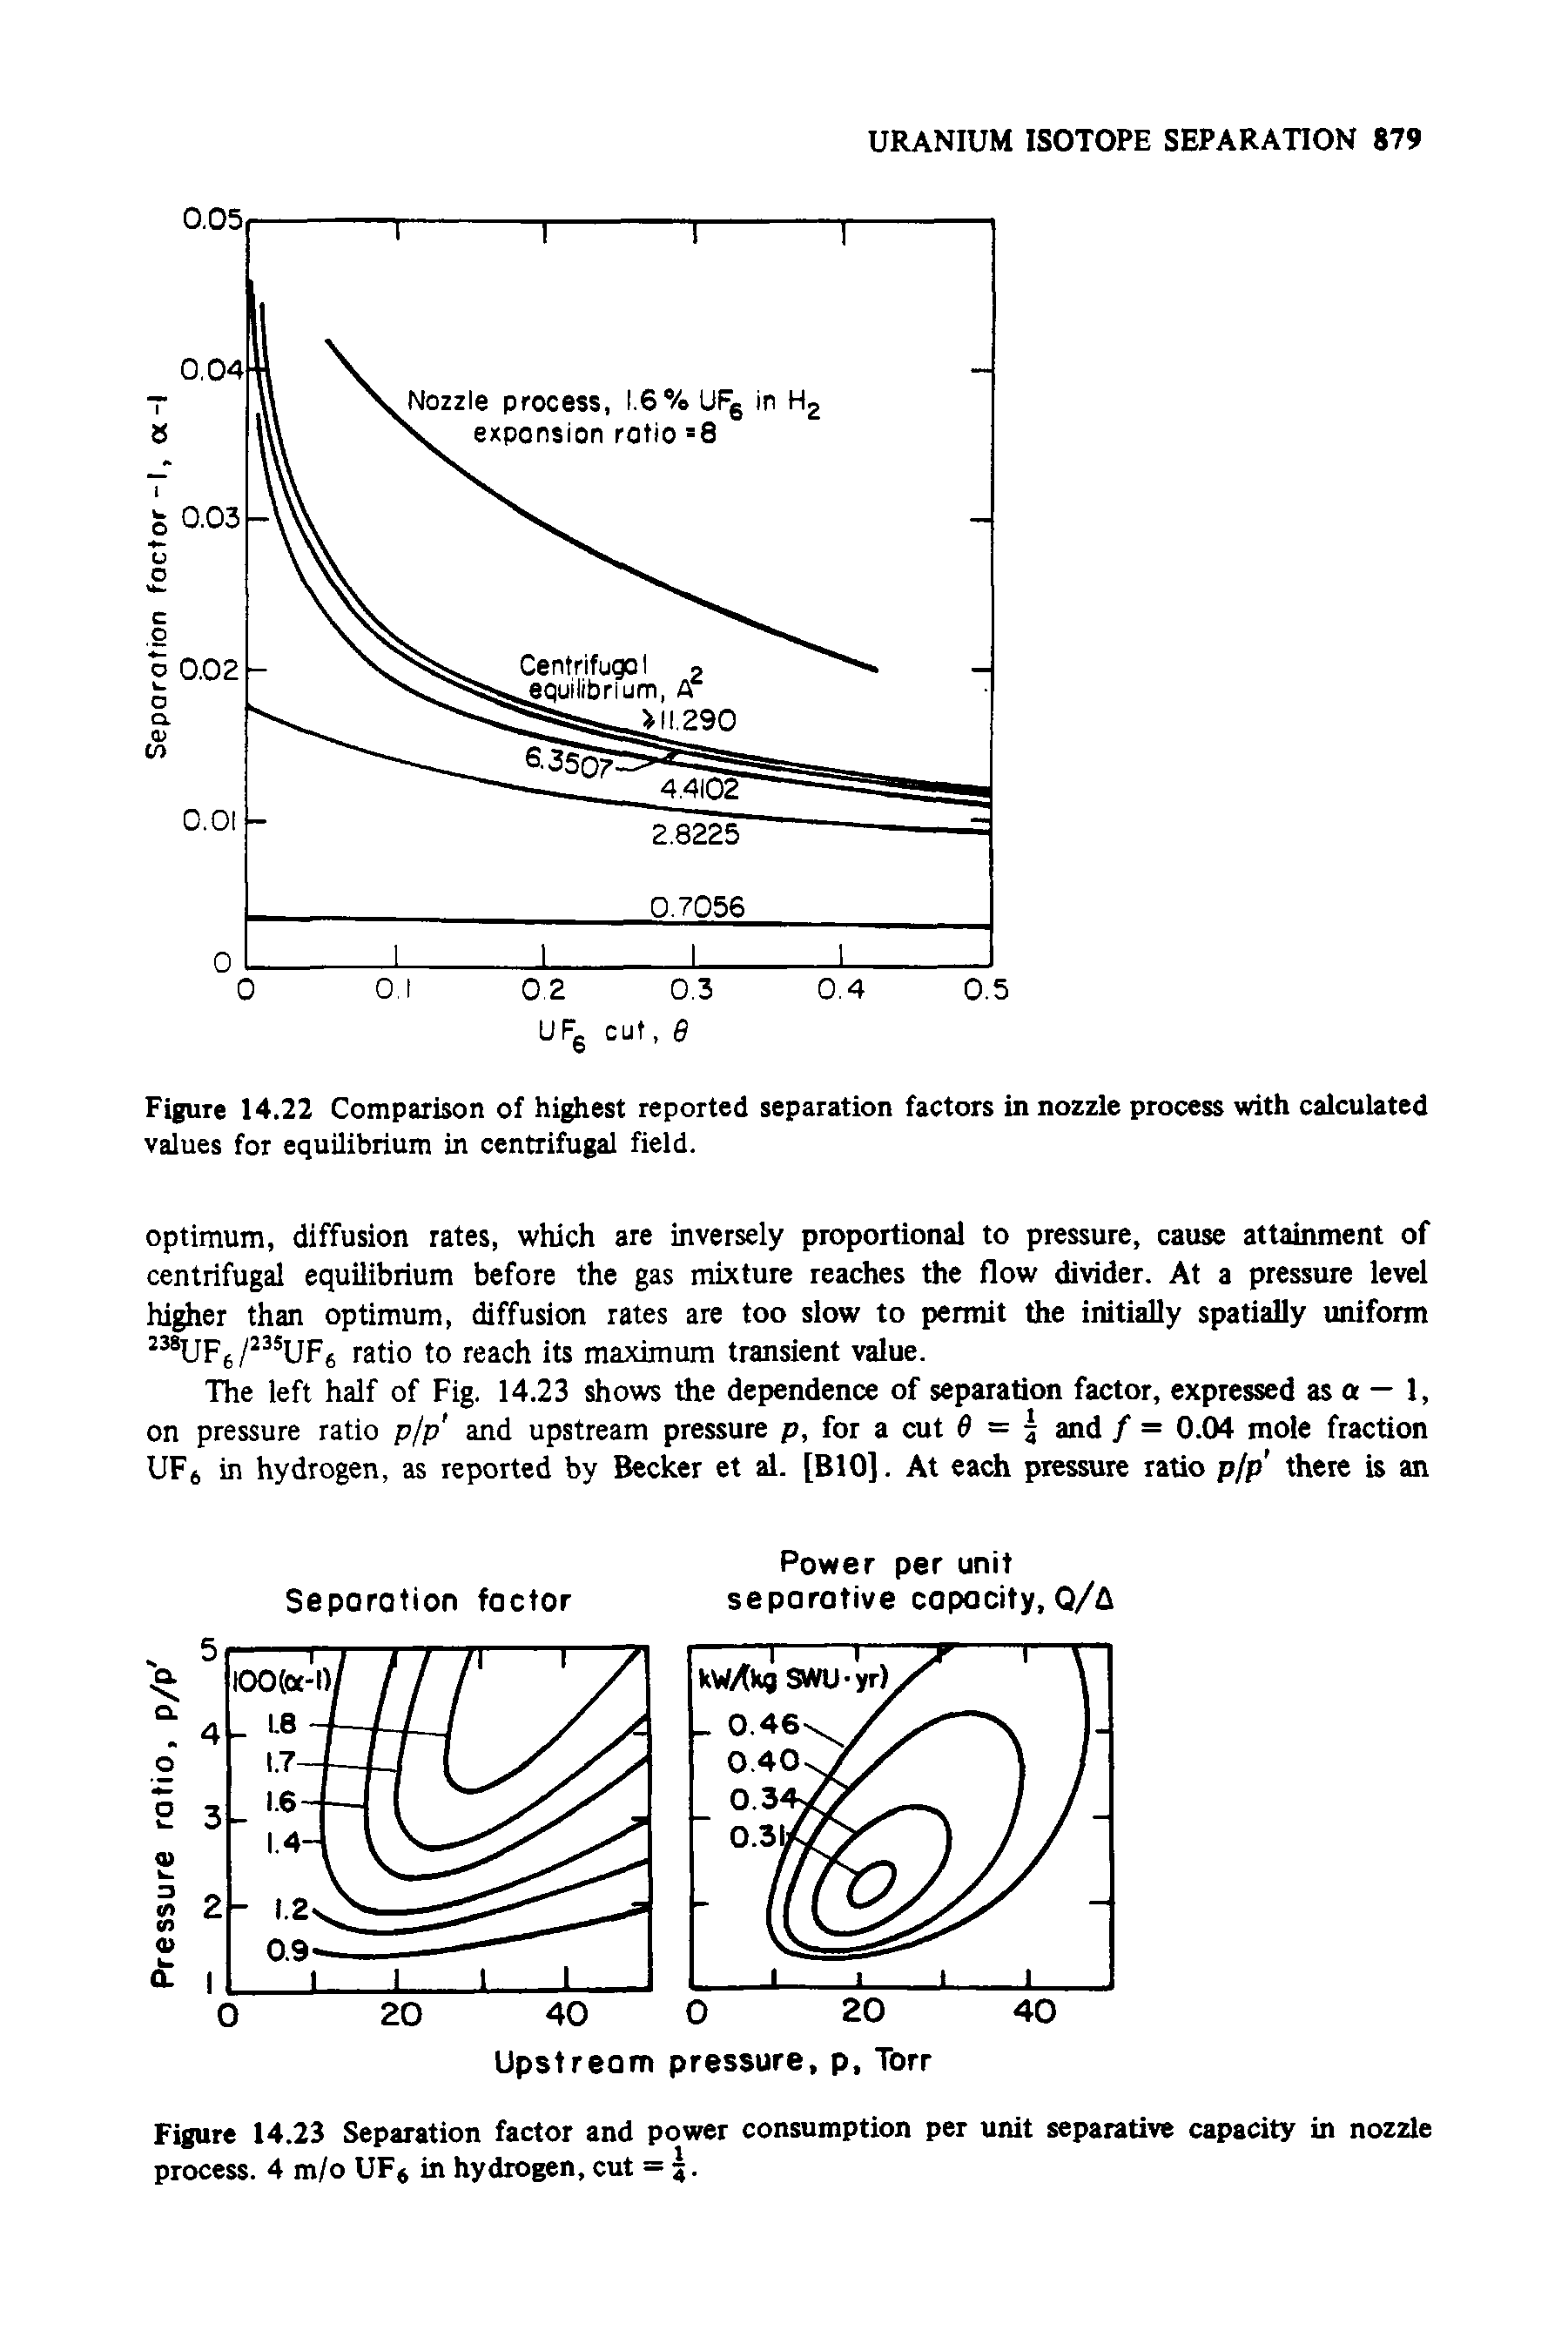 Figure 14.22 Comparison of hipest reported separation factors in nozzle process with calculated values for equilibrium in centrifugal field.